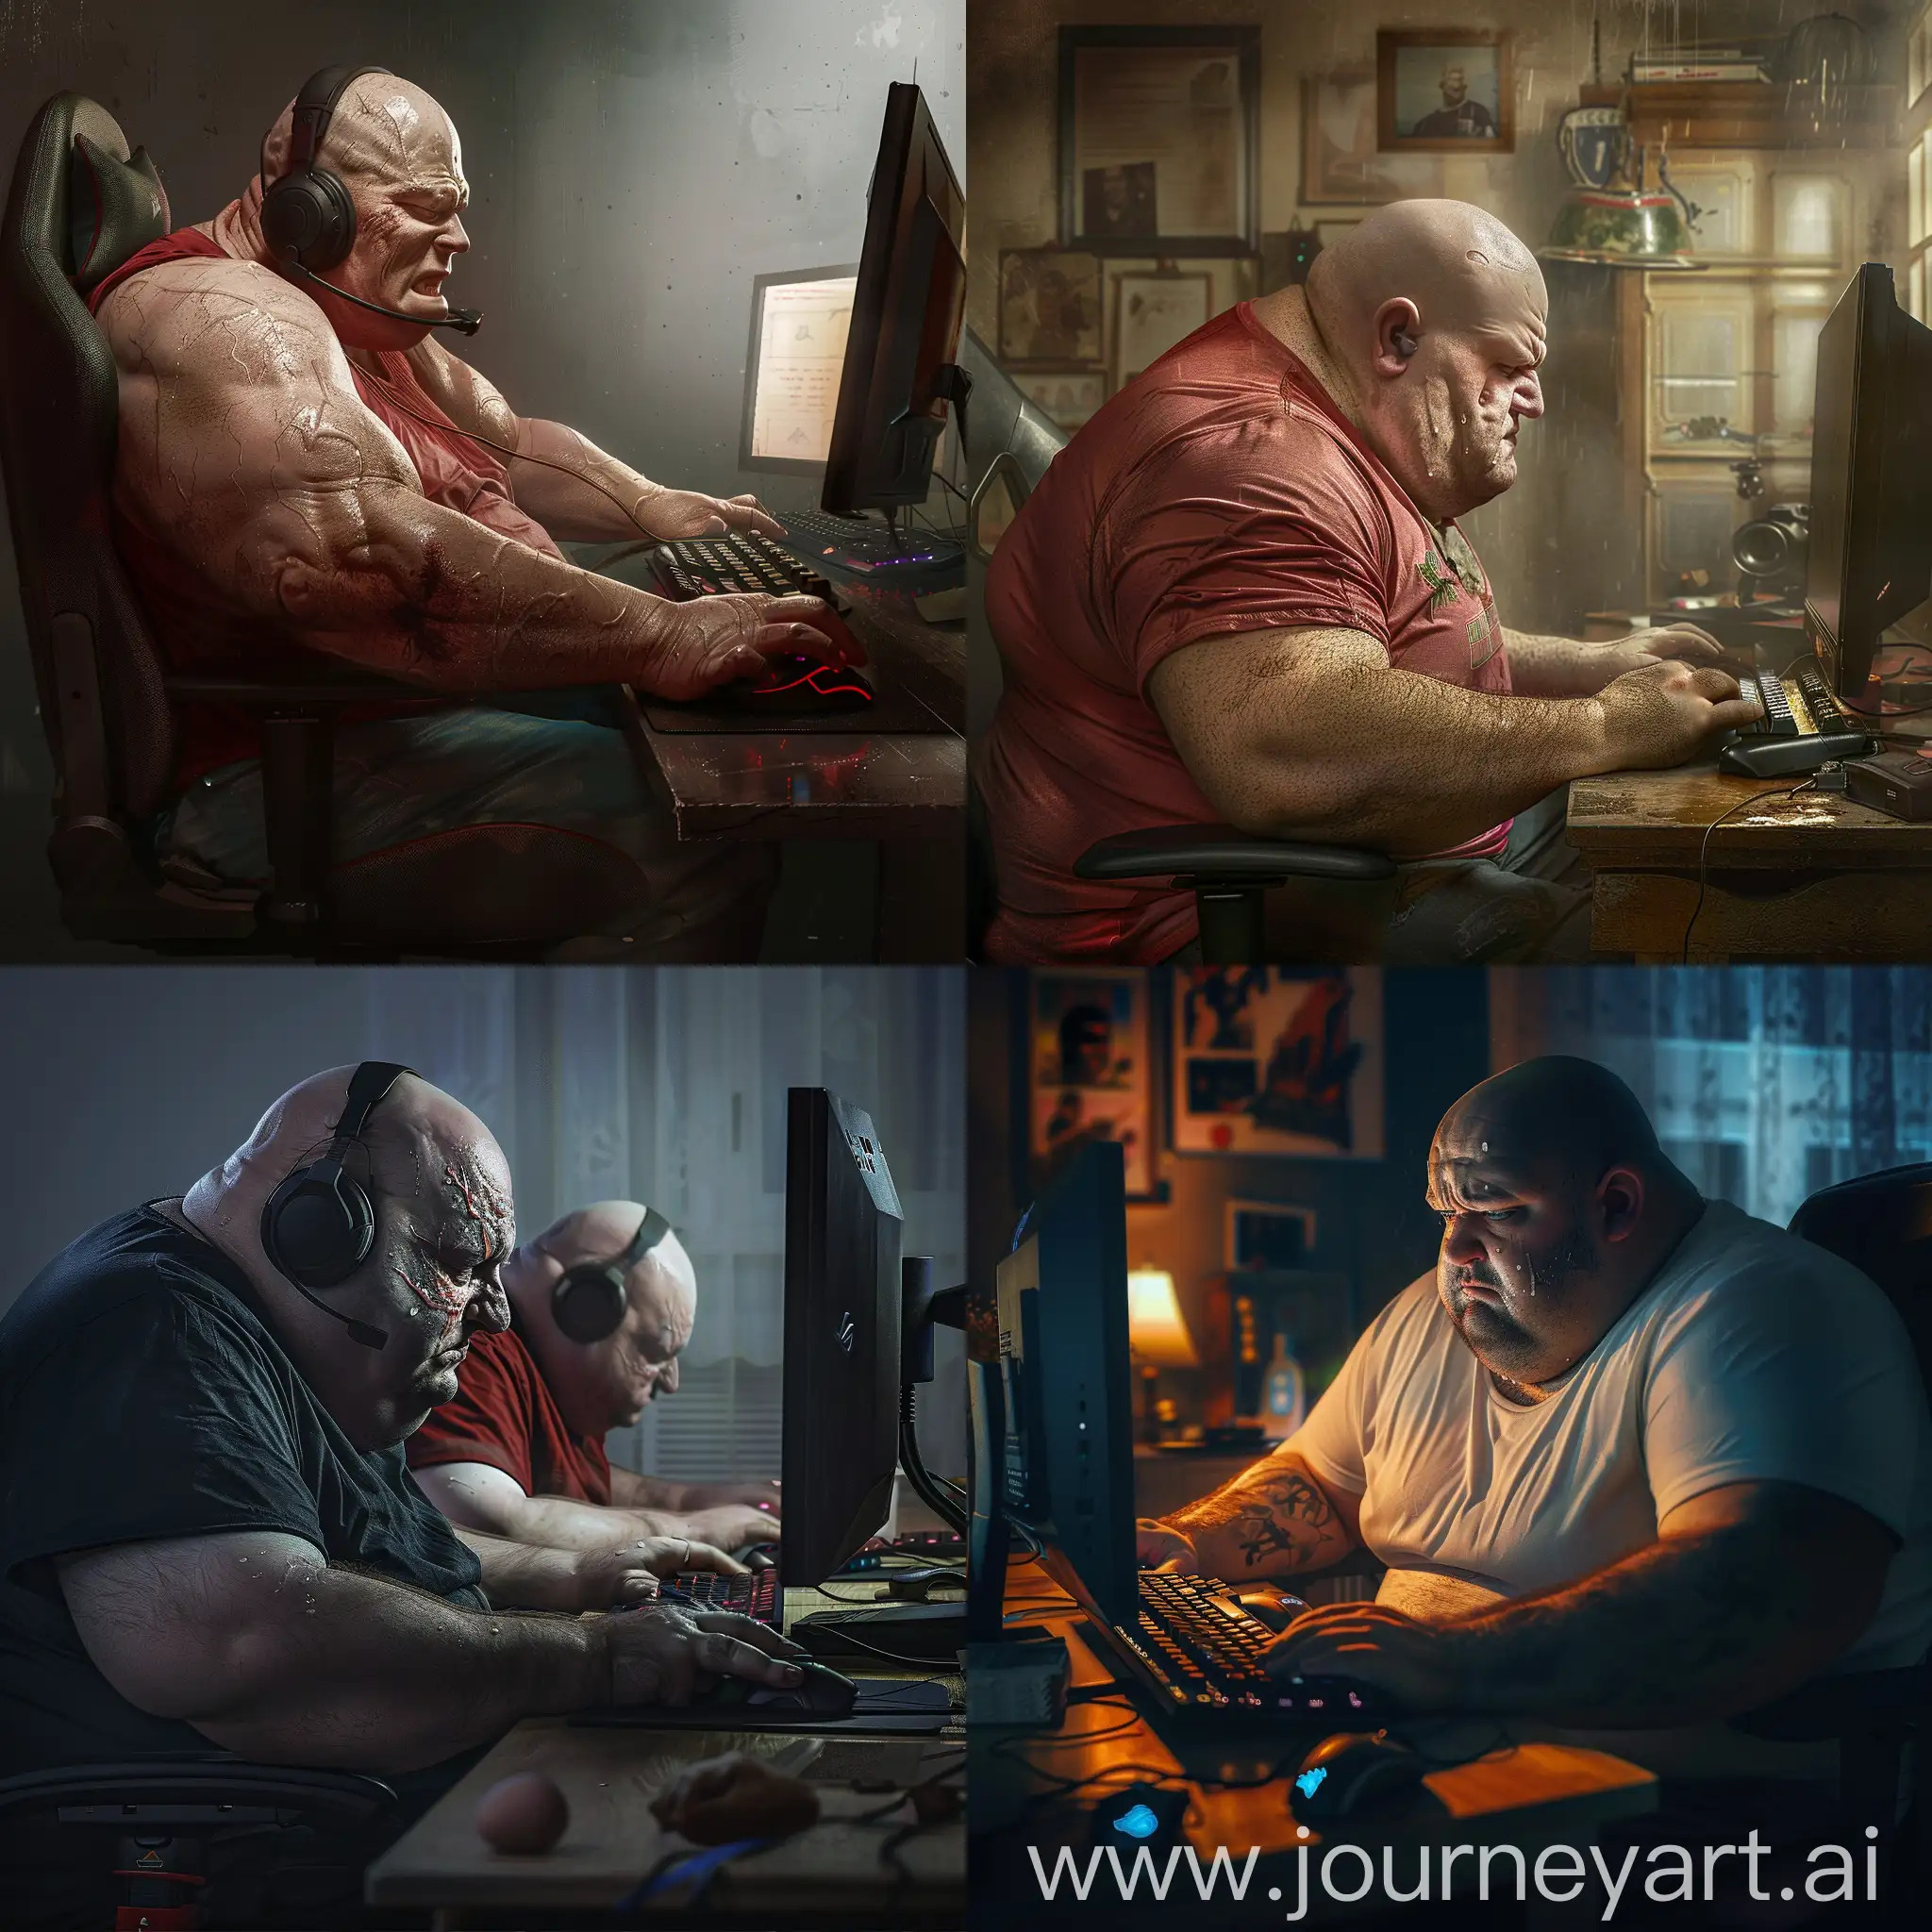 Energetic-Gaming-Session-Bald-and-Plump-Gamers-in-Intense-PC-Play